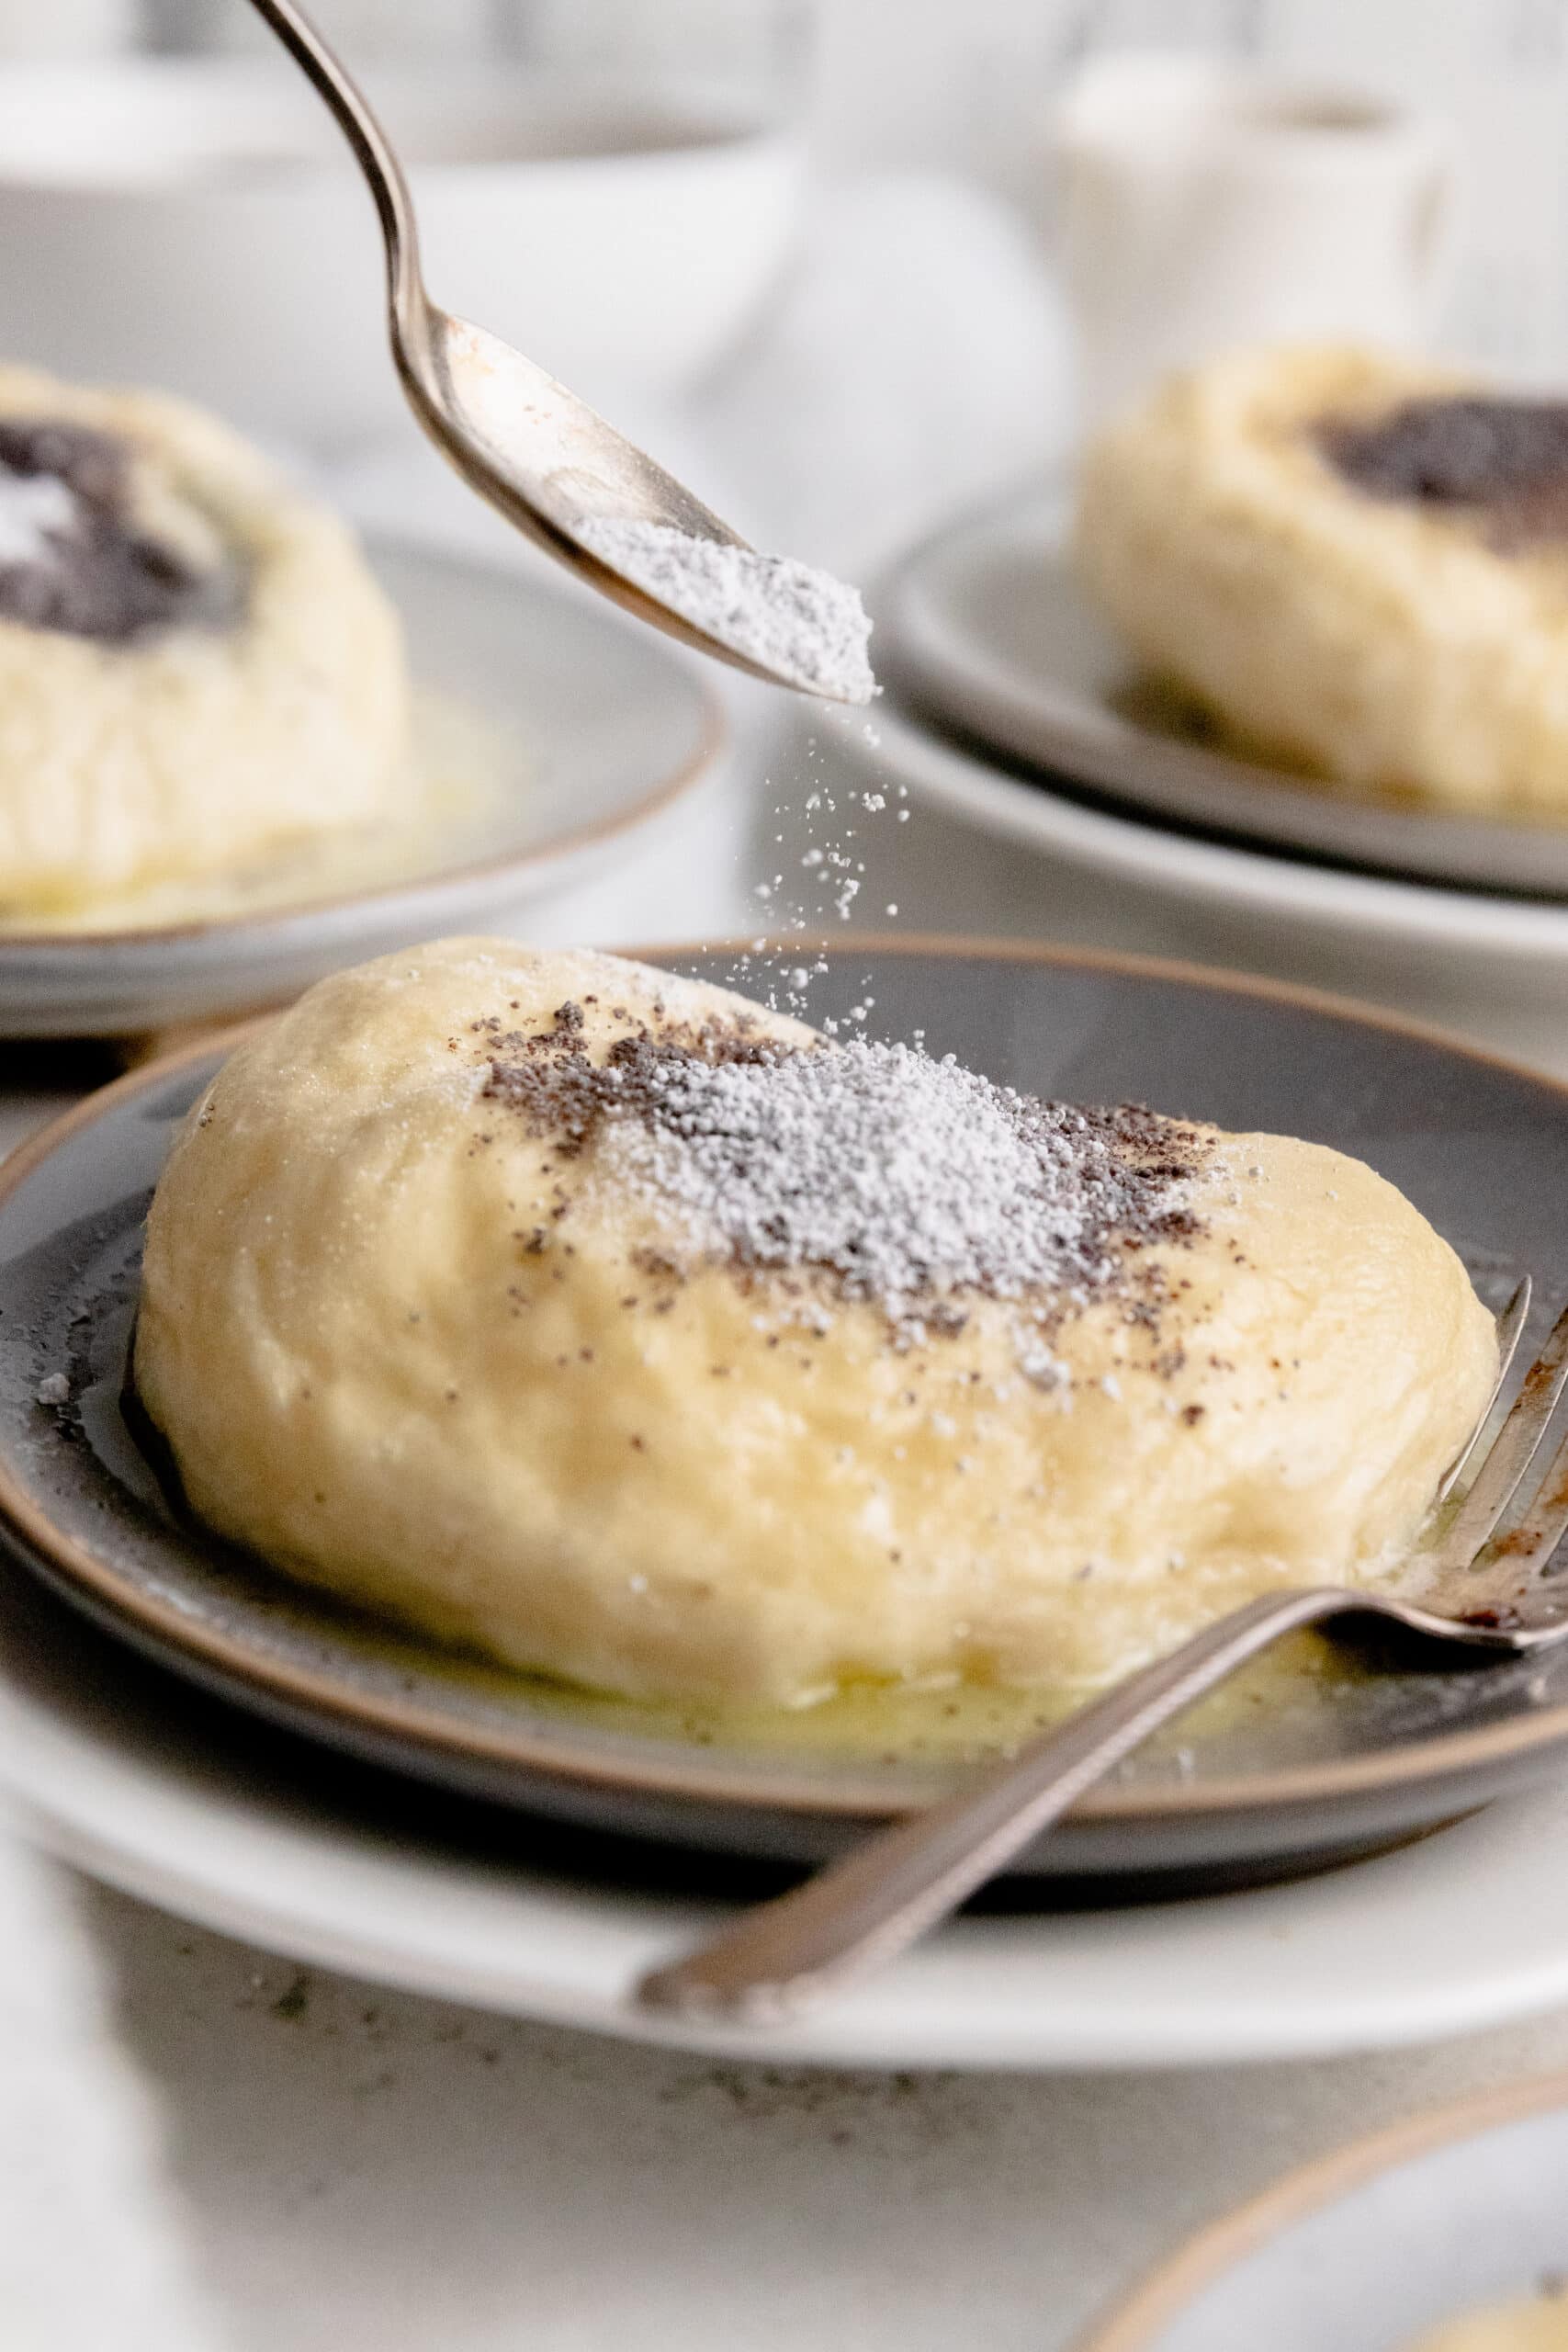 Side view of a germknödel being sprinkled with poppyseeds and powdered sugar.